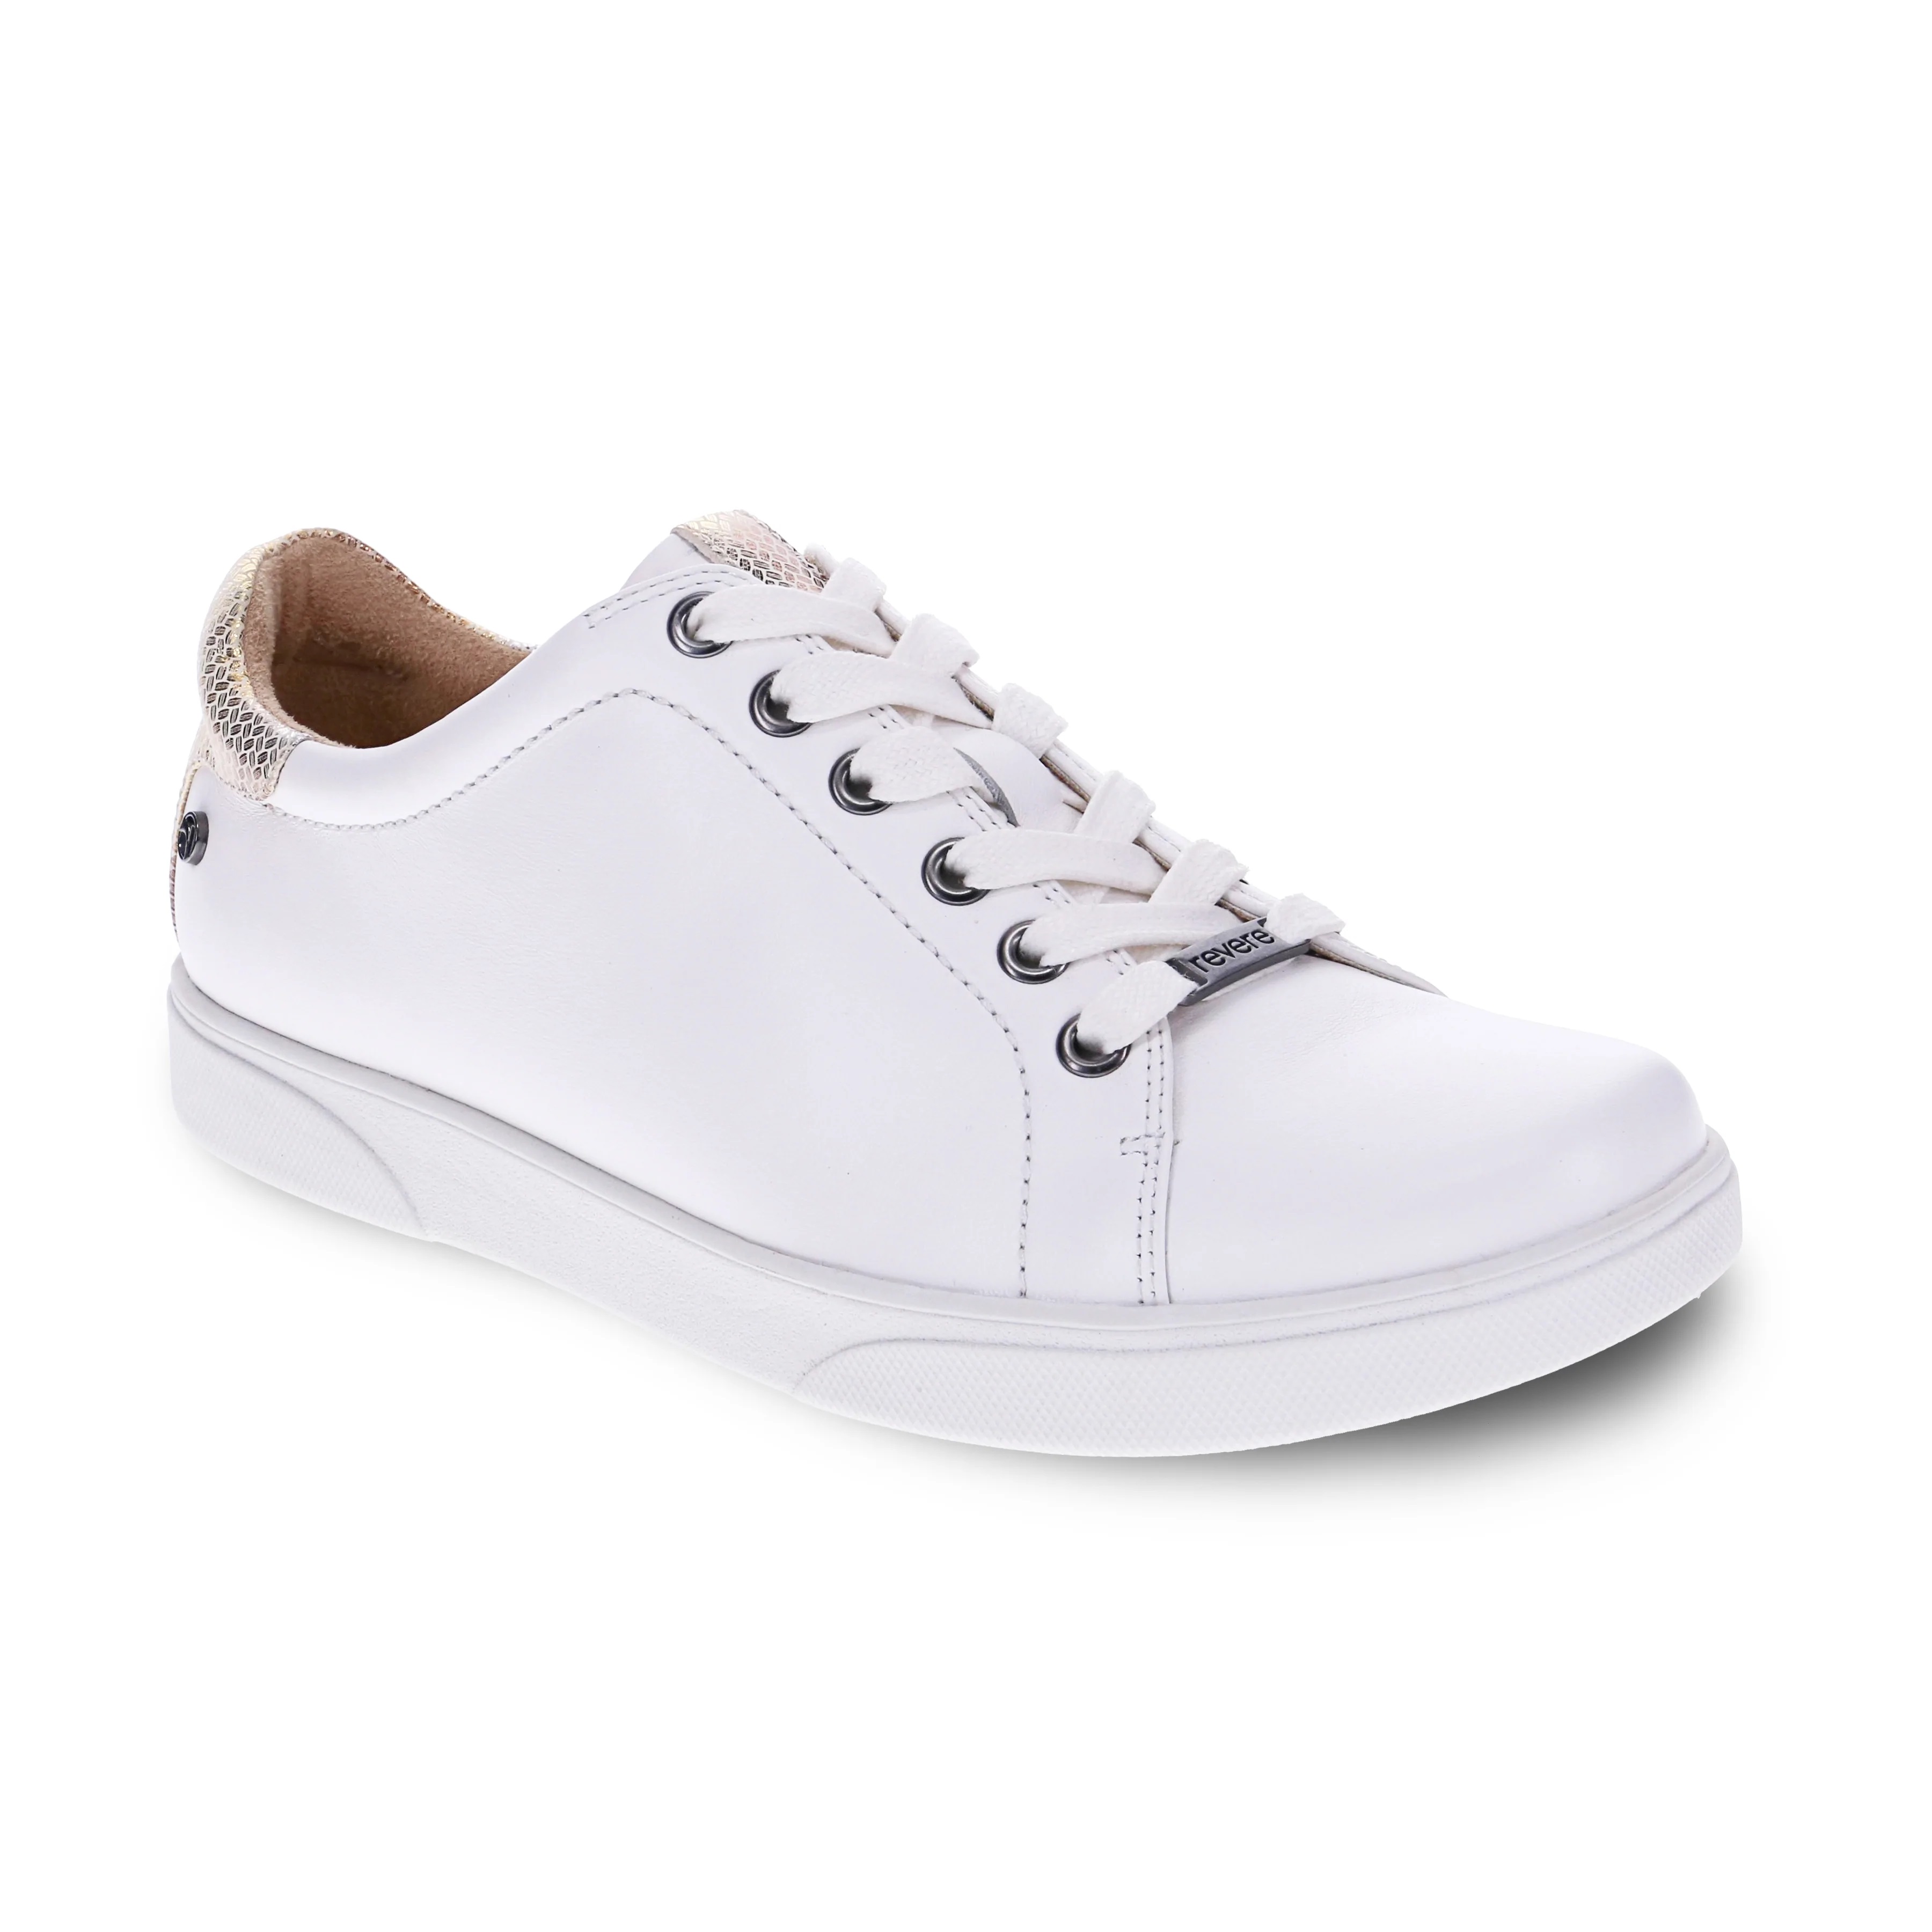 Revere Limoges Women's Casual Athletic Shoe - Extra Depth - Wide